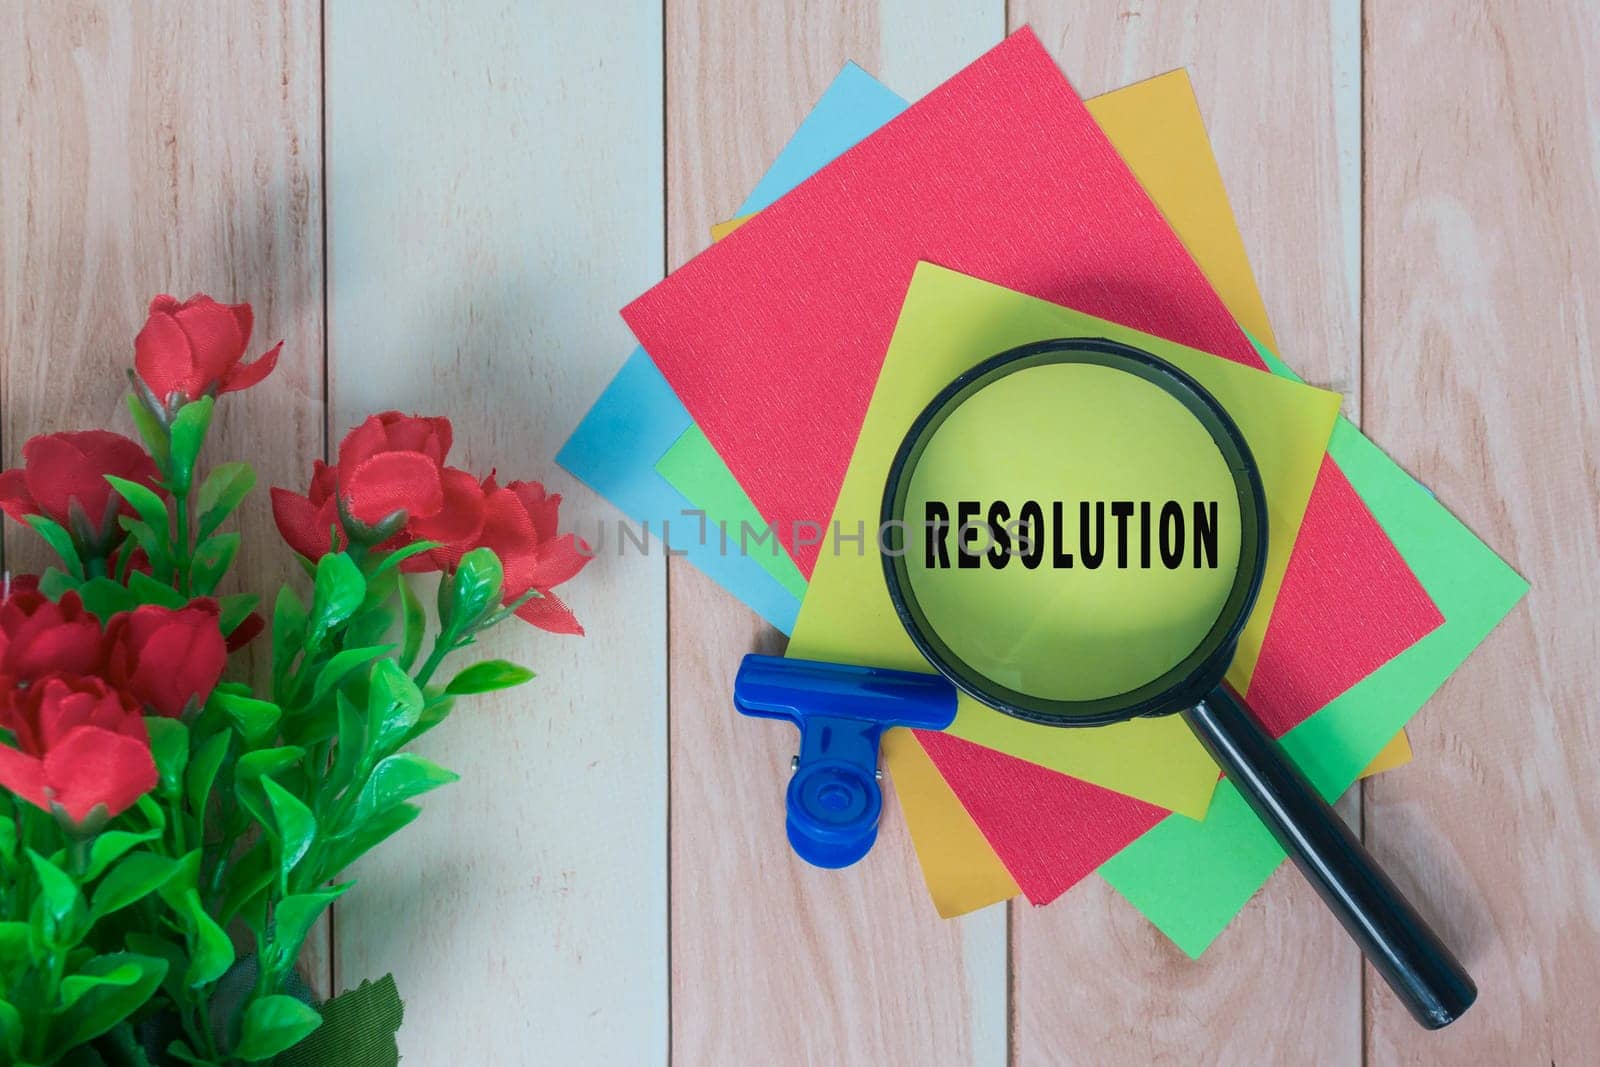 Resolution word on colorful adhesive paper with magnifying glass on wooden desk. by JennMiranda